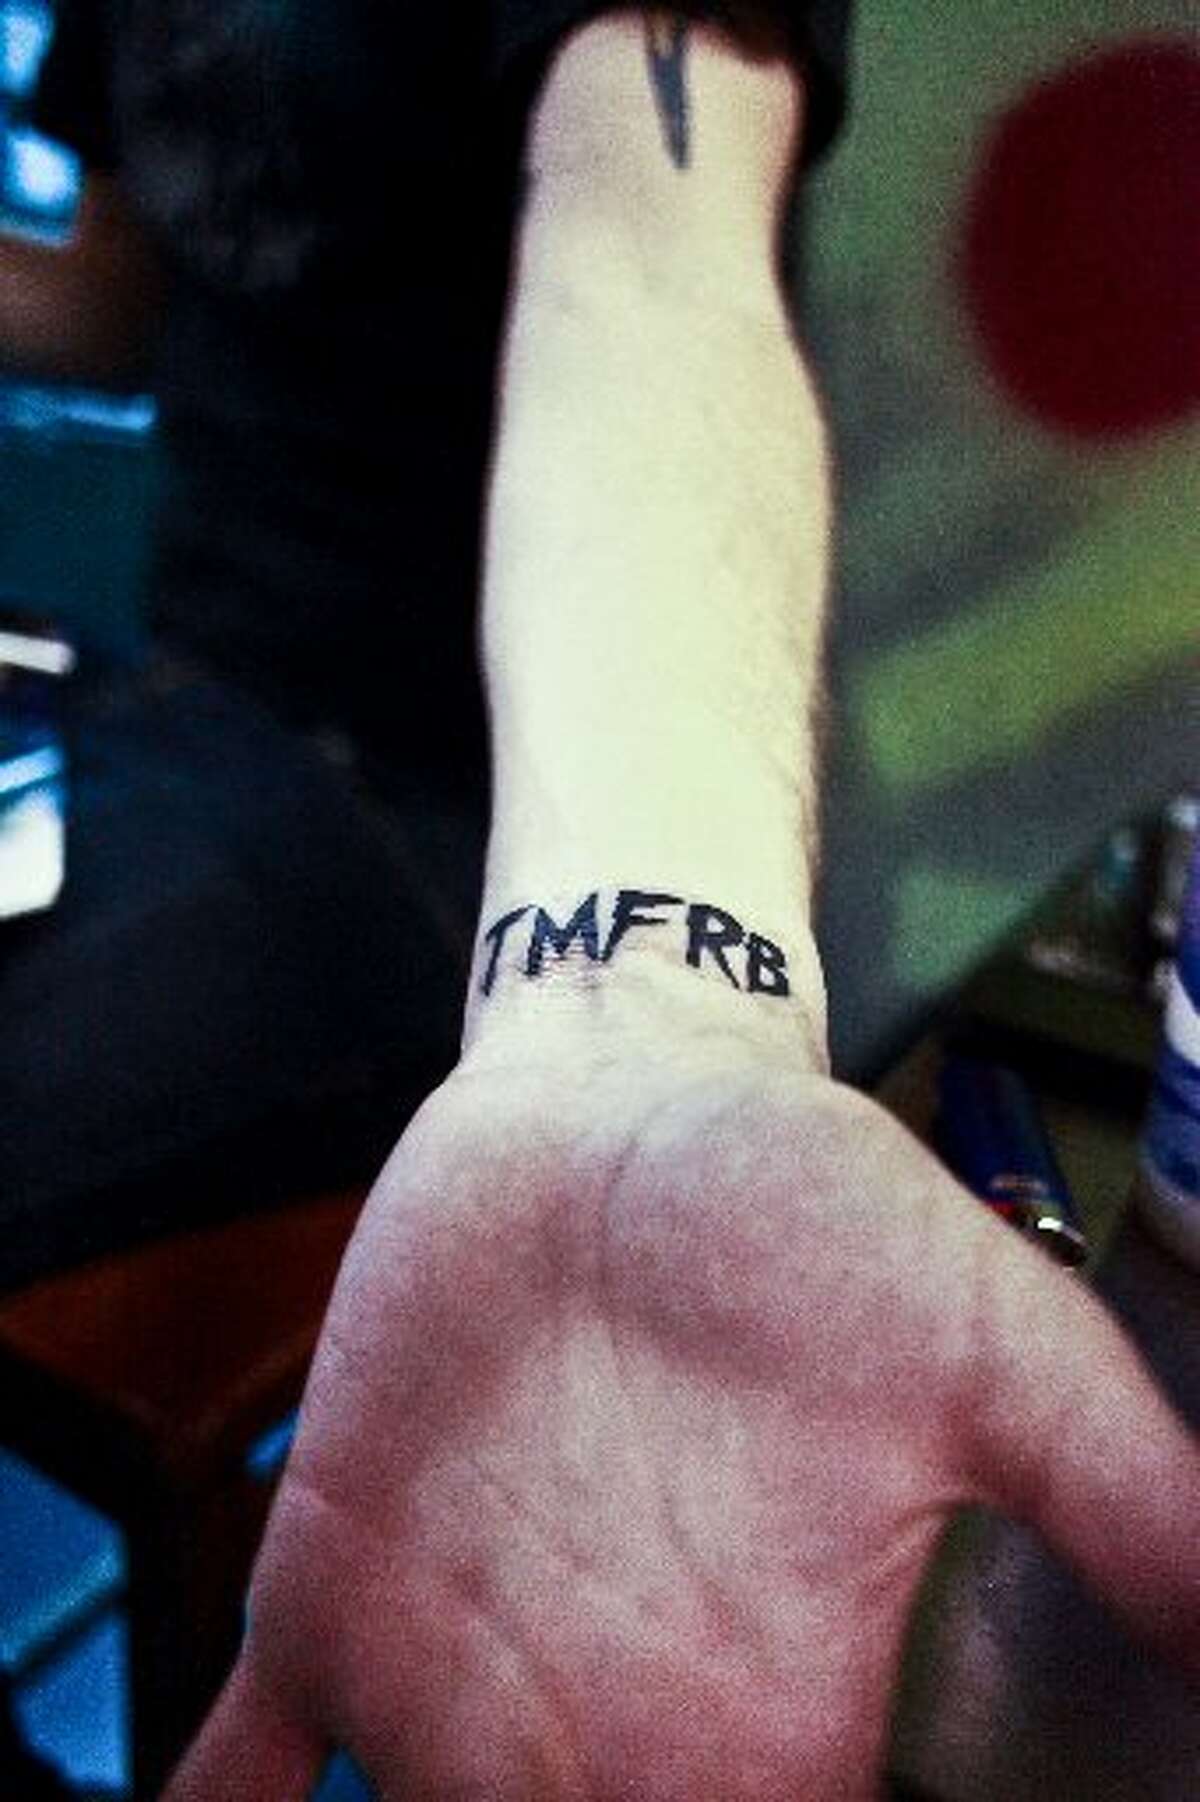 The Ramblin' Boys vocalist Bobby Parrott shows his TMFRB tattoo for their debut EP, TMFRB, that will be released at Tequila Rok on February 16, 2013. Randy Edwards/cat5